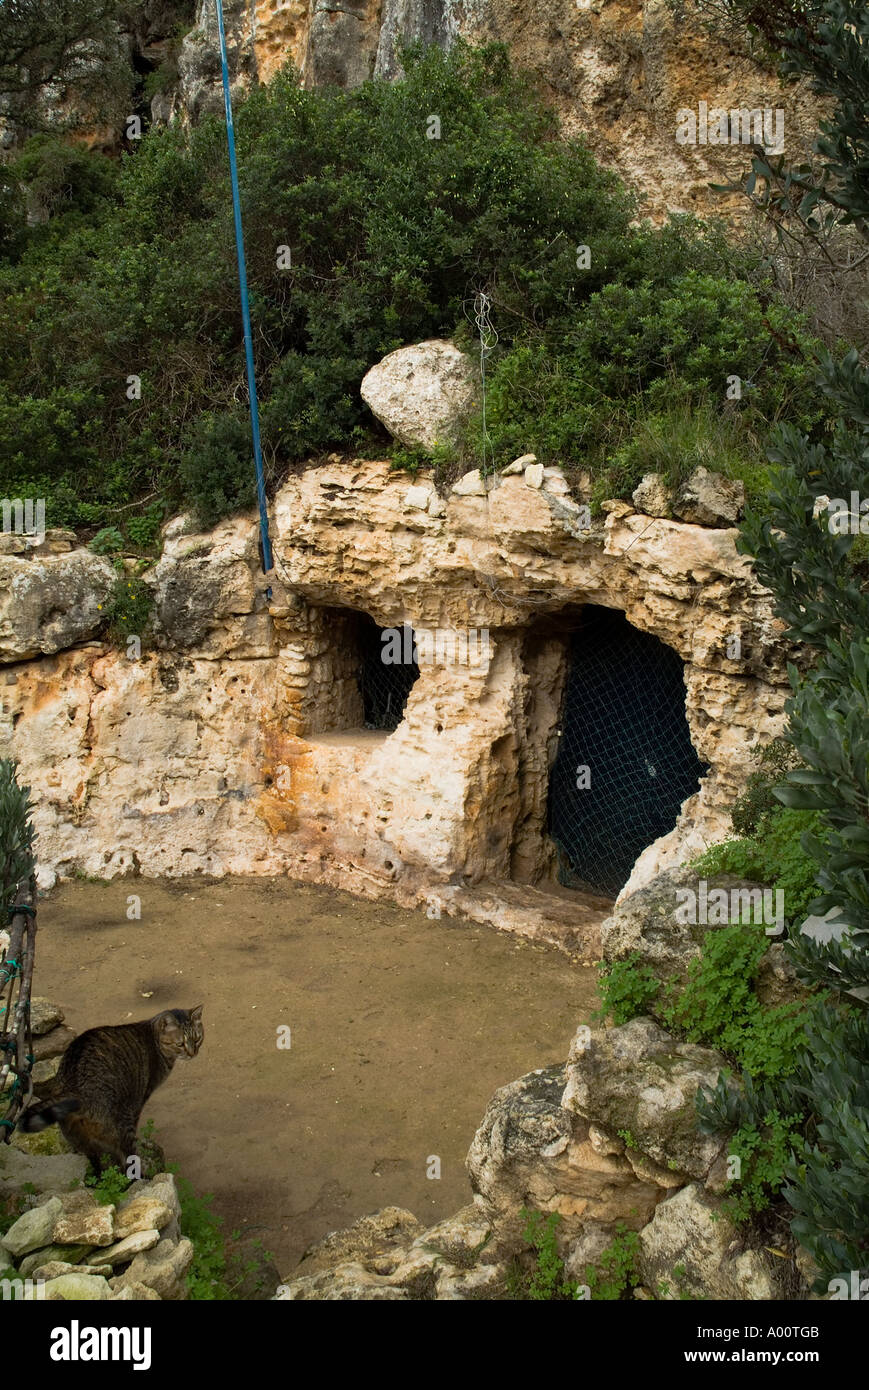 dh Neolithic burial caves europe CALES CUEVAS MENORCA BALEARIC Prehistoric bronze age cave prehistory megalithic site Stock Photo